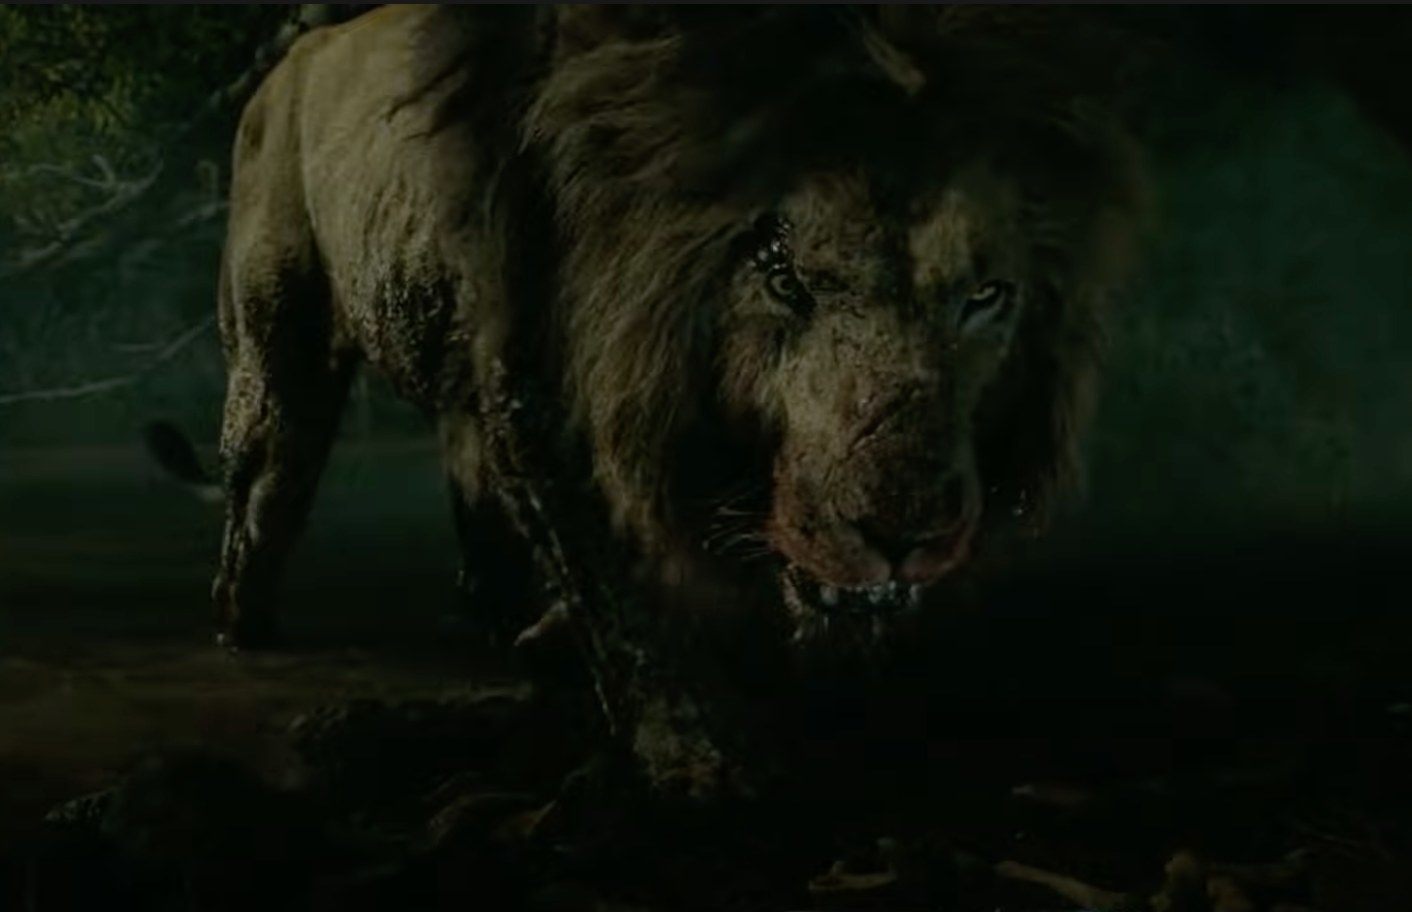 The rogue lion in Beast, CGI created